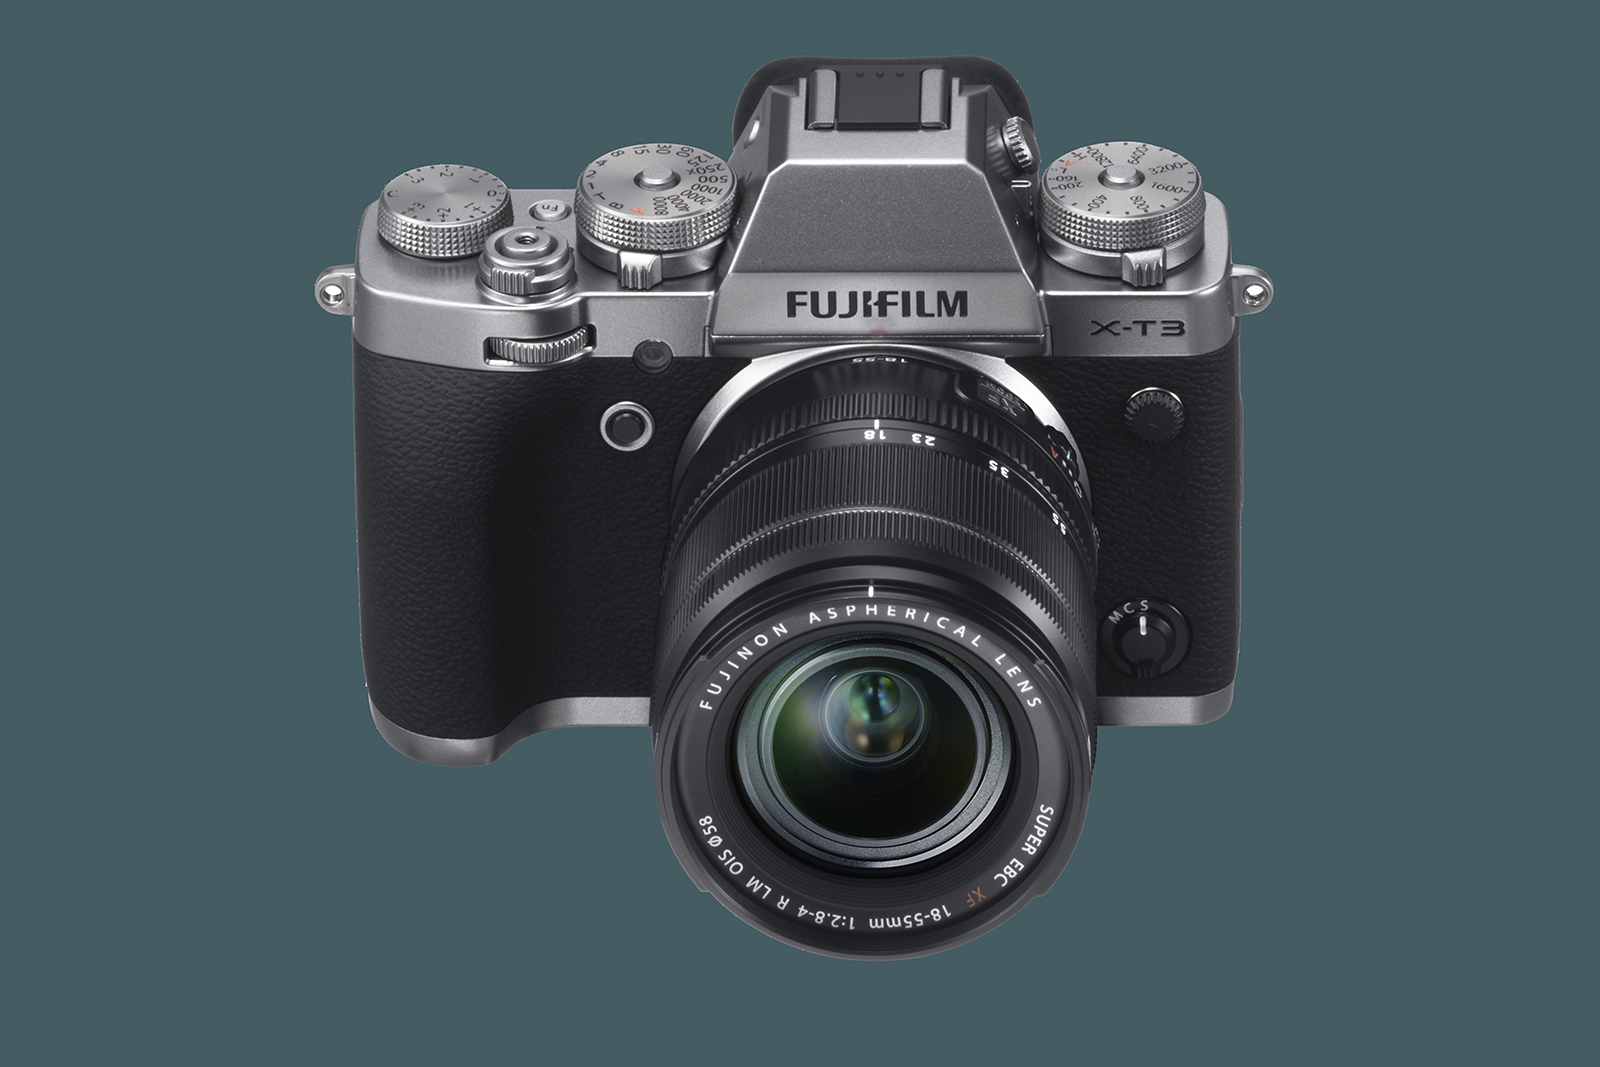 fujifilm unveils x t3 mirrorless camera with new sensor and processor silver highangle xf18 55mm